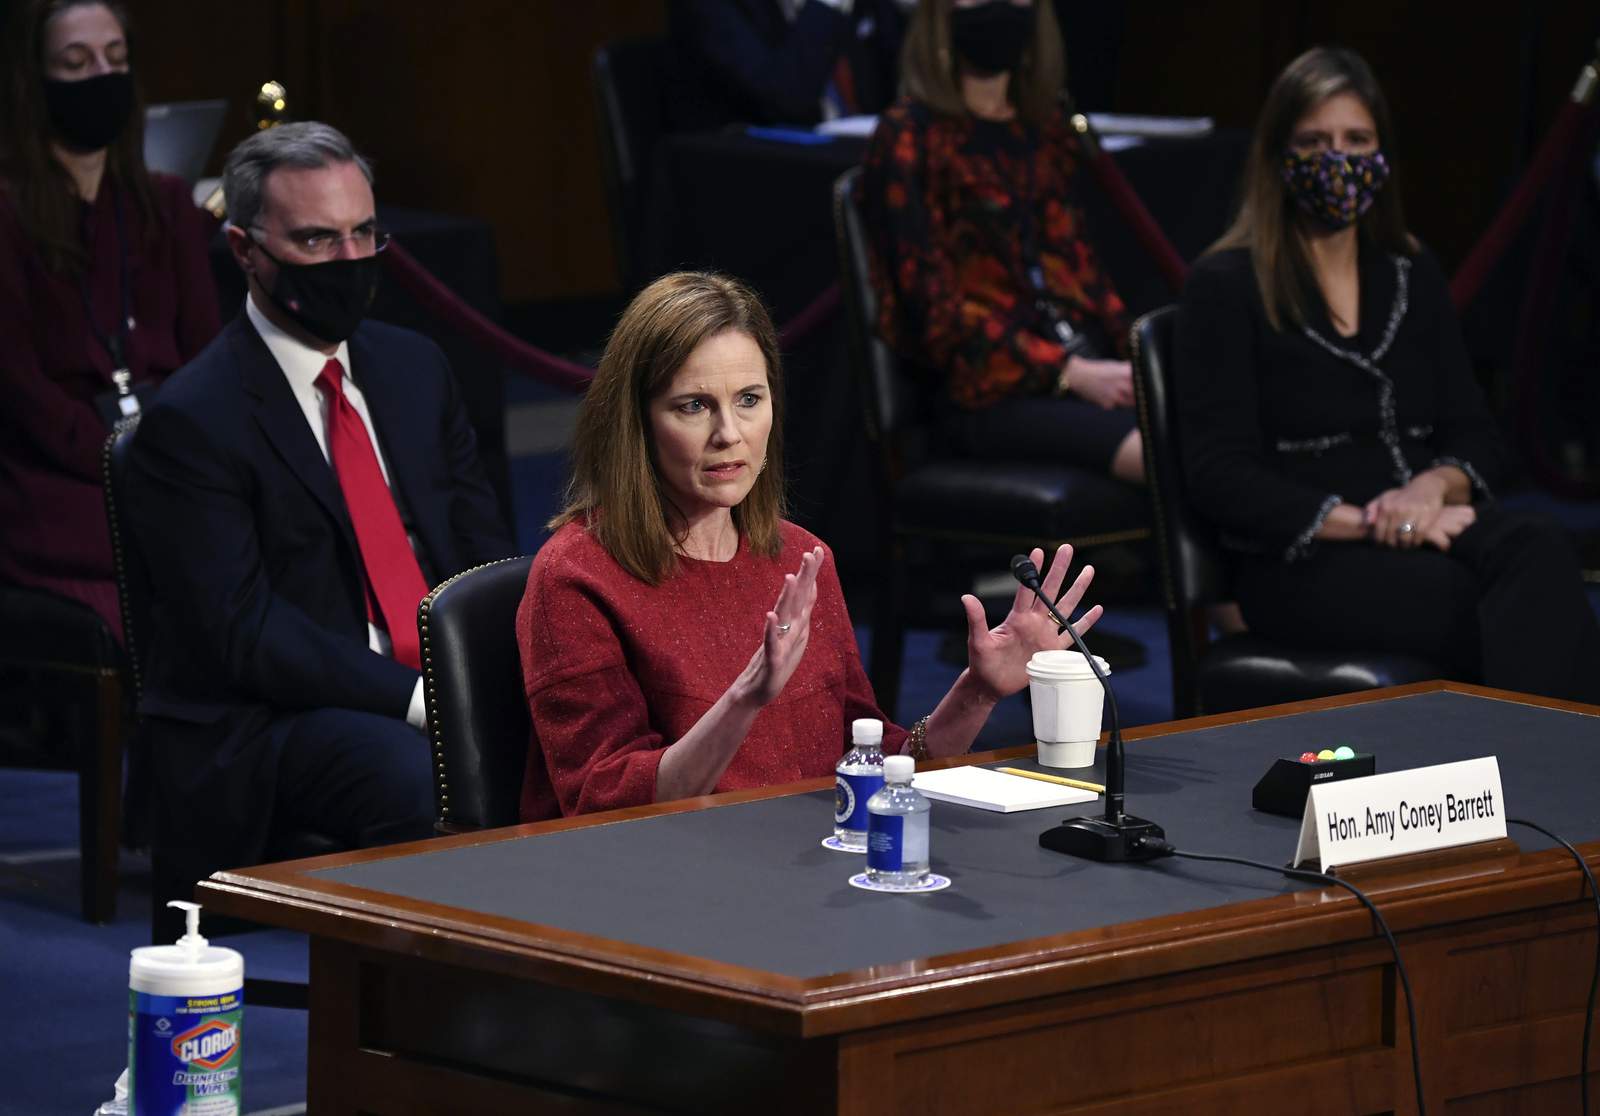 The Latest: Day 2 of Barrett confirmation hearings wraps